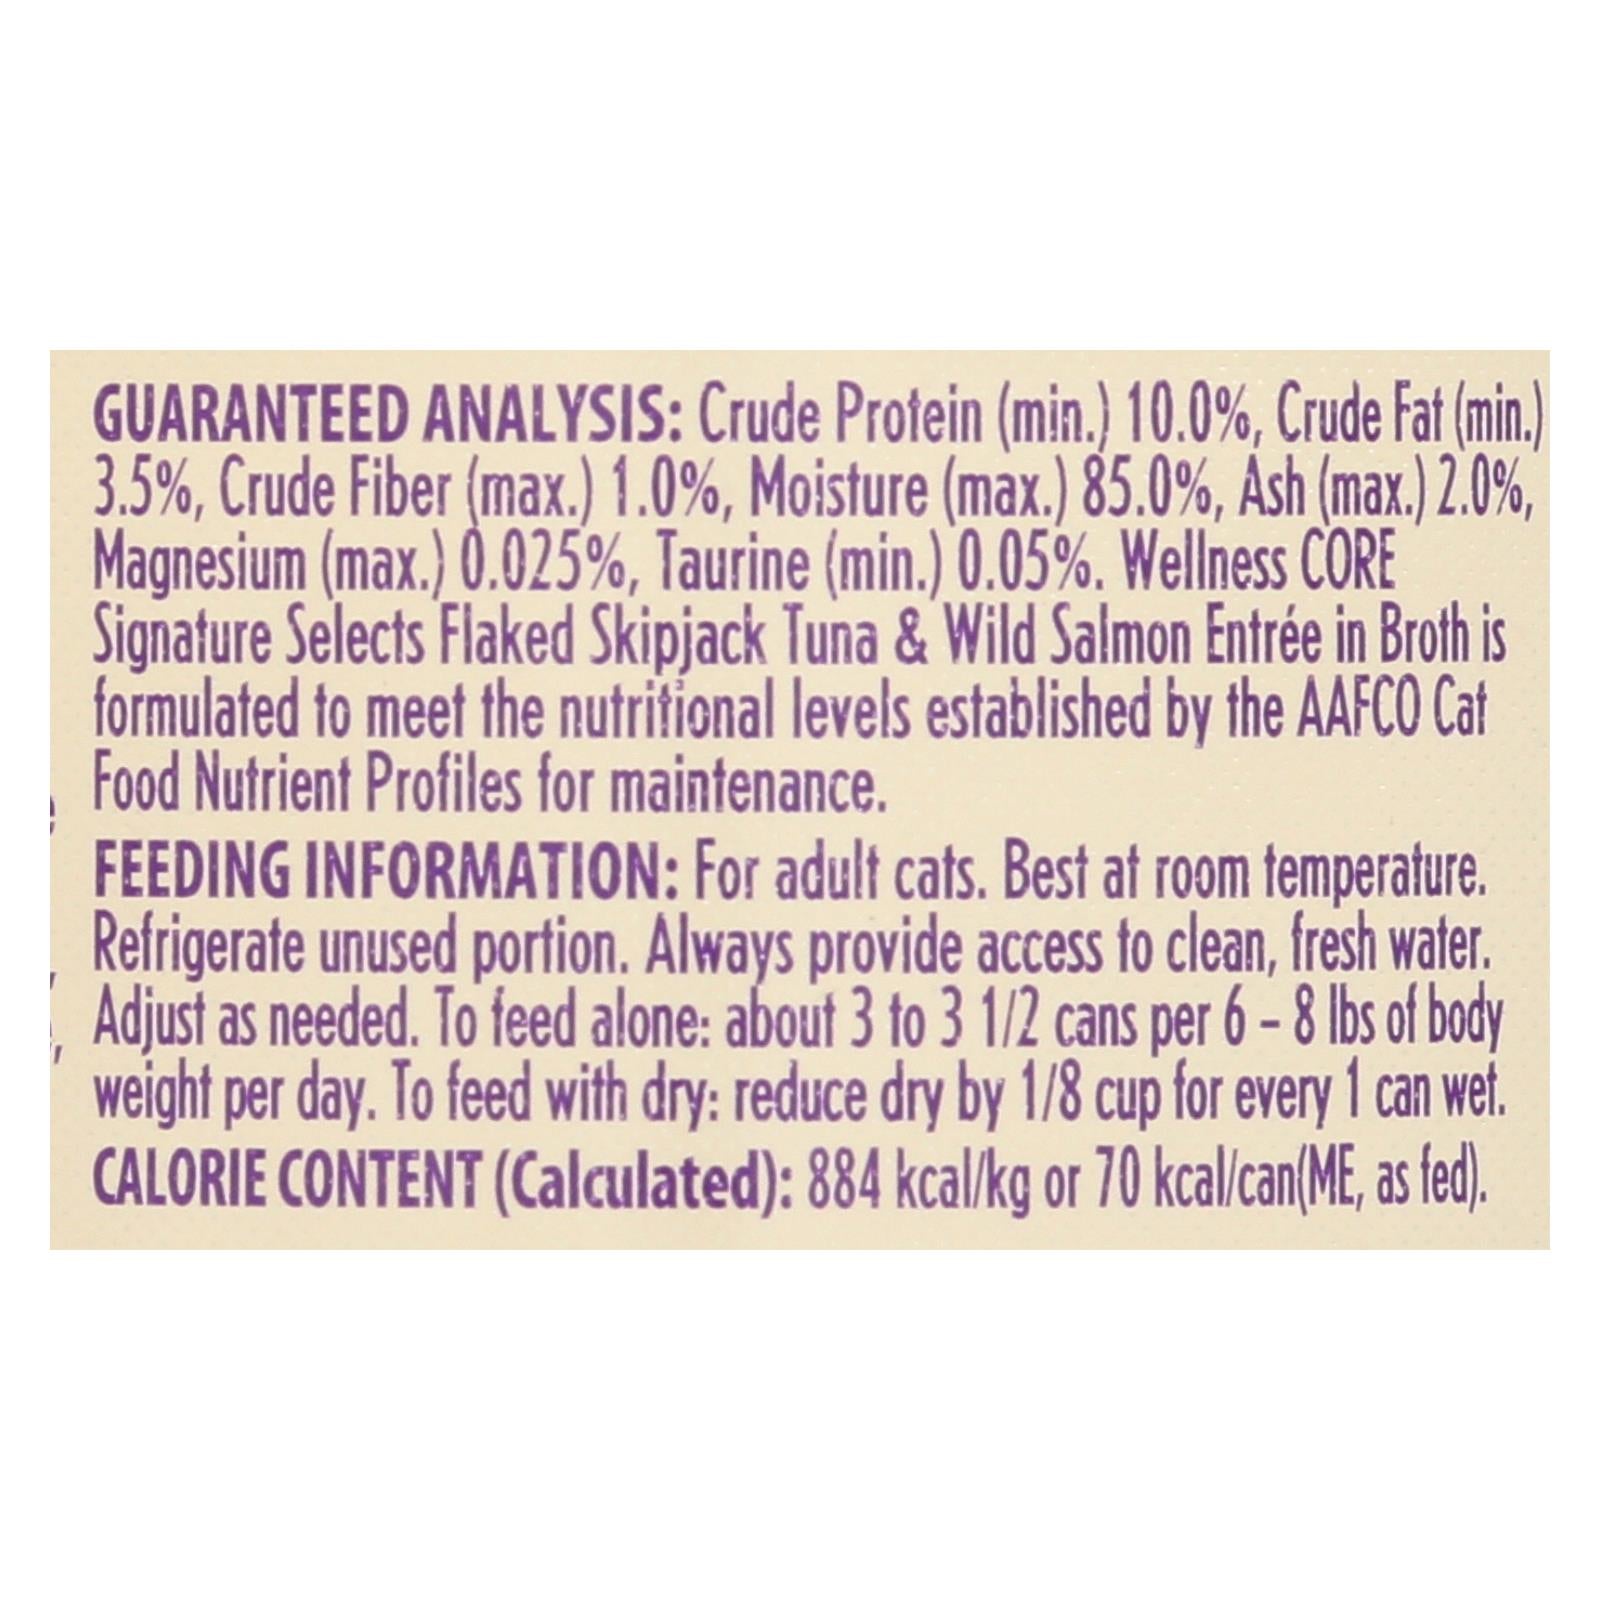 Wellness Pet Products - Signature Selects Cat Food - Skipjack Tuna and Wild Salmon Entrée in Broth - Case of 12 - 2.8 oz.